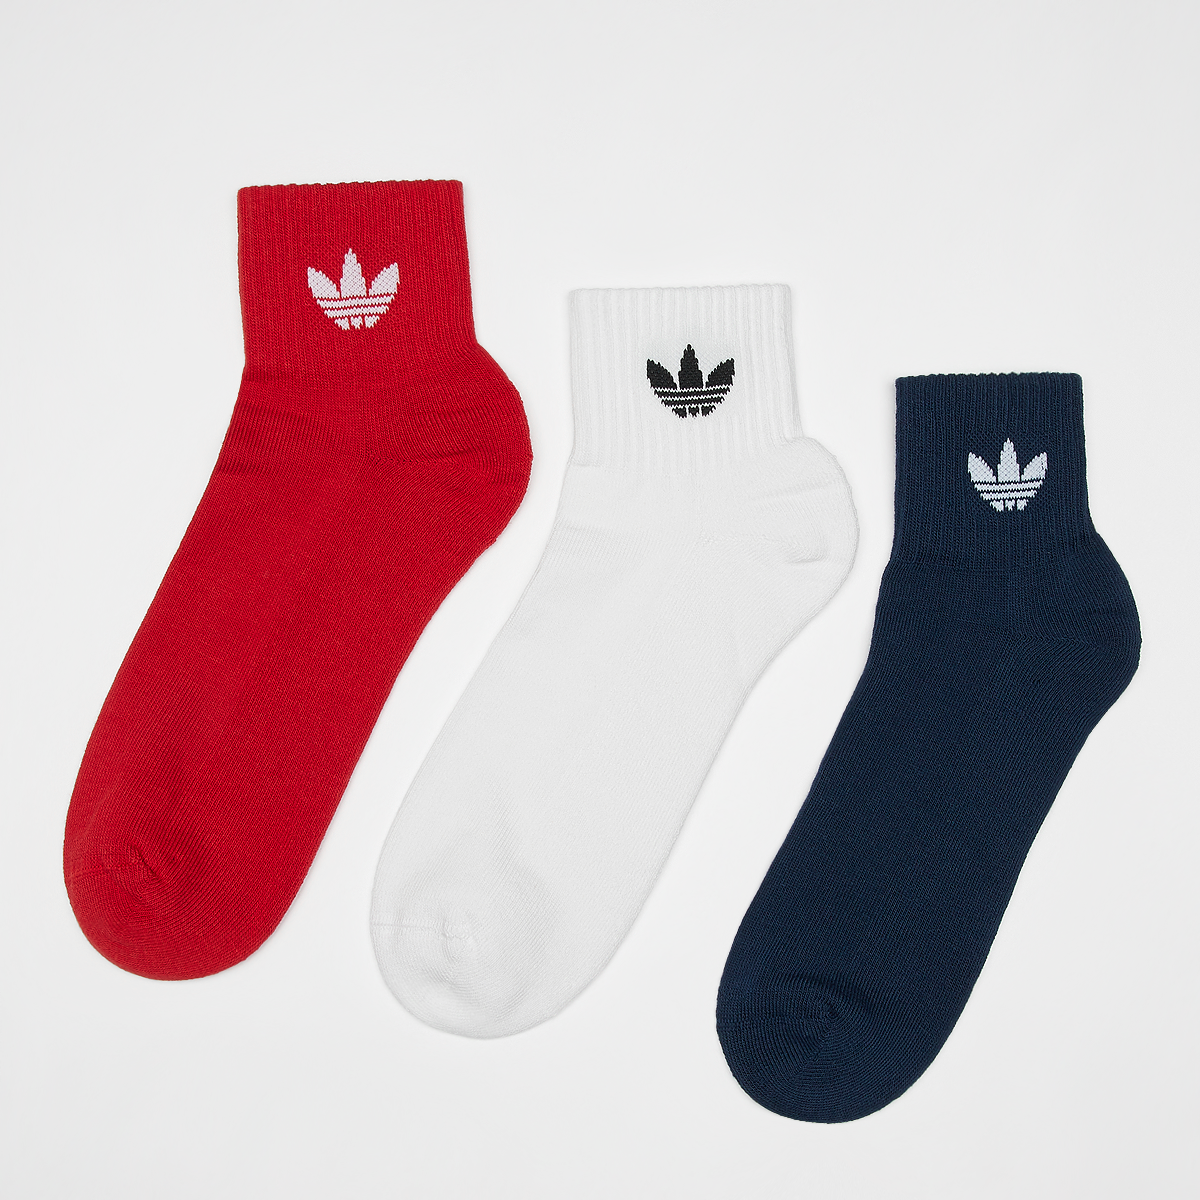 Chausetttes Mid Ankle adicolor (3 Pack), adidas Originals, Accessoires, night indigo/white/better scarlet, taille: 37-39